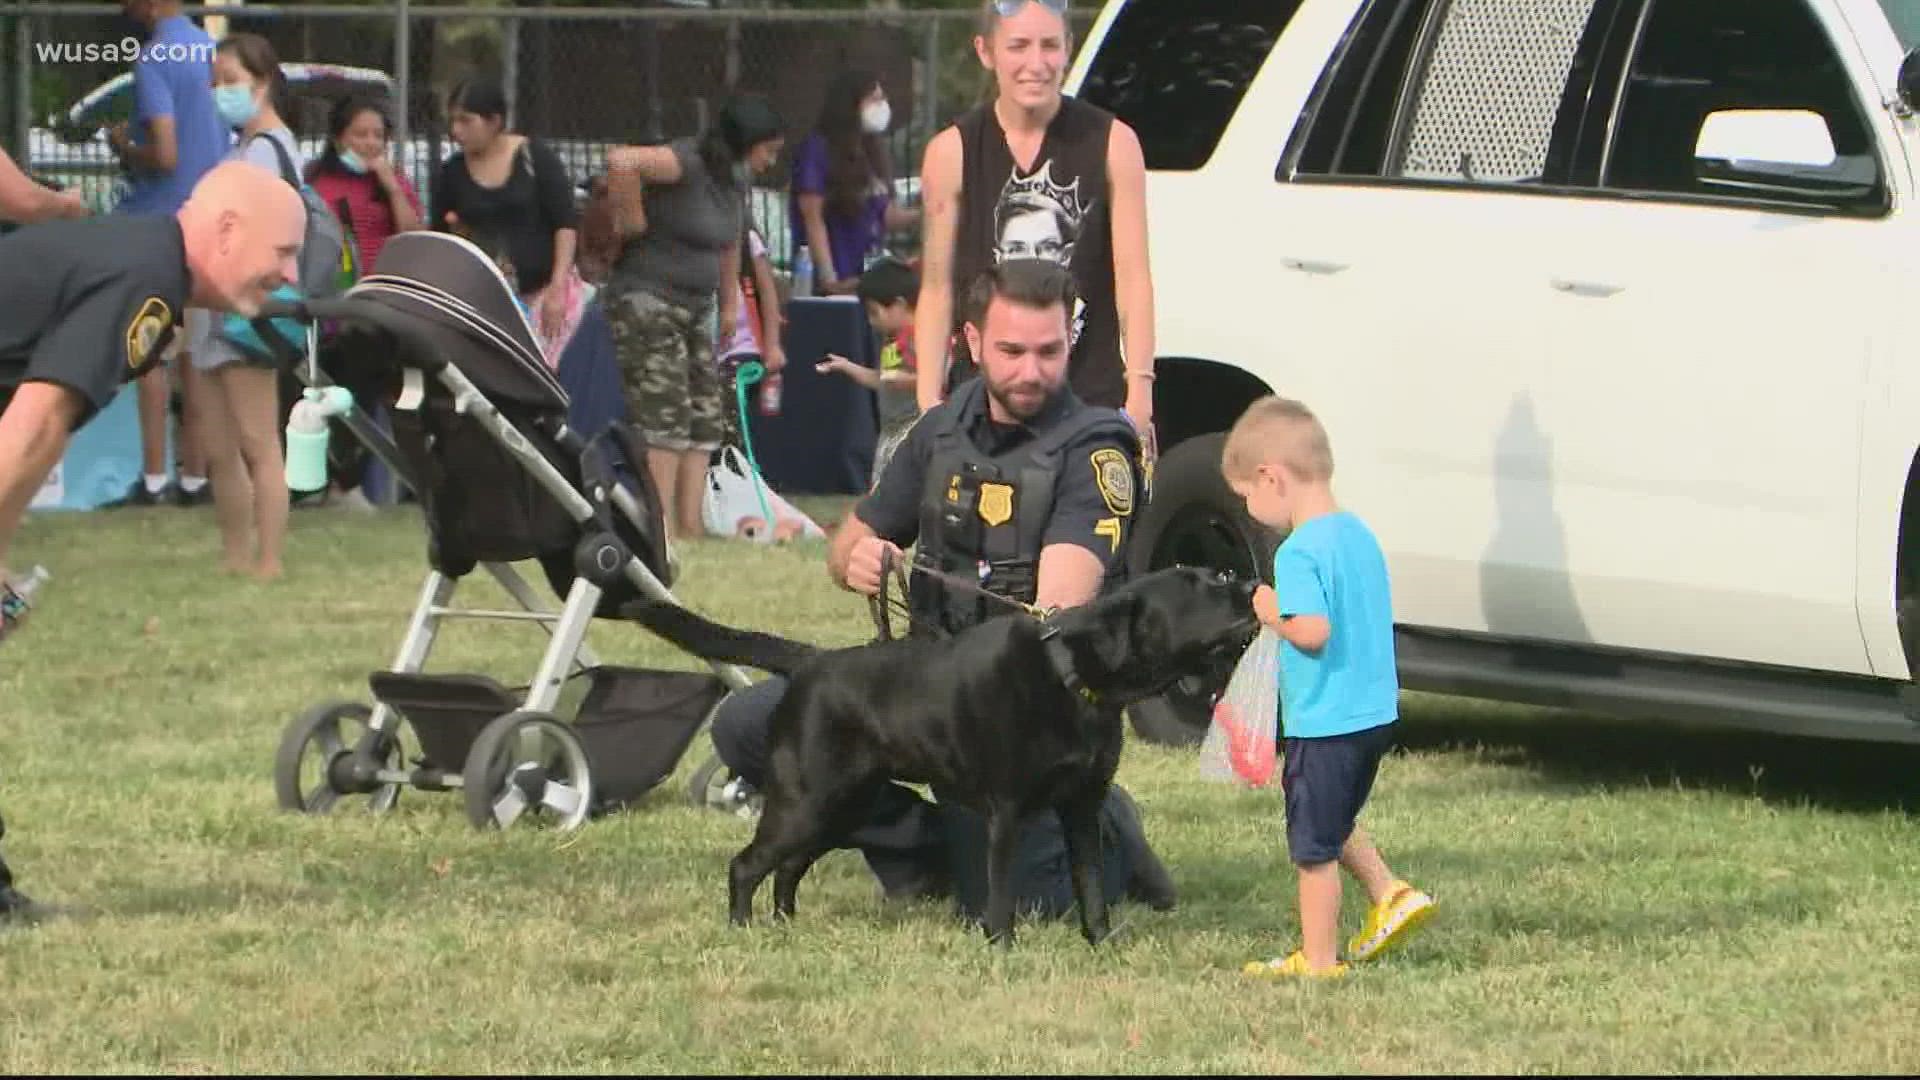 On Tuesday, special events were held around the region to promote police and community relationships.